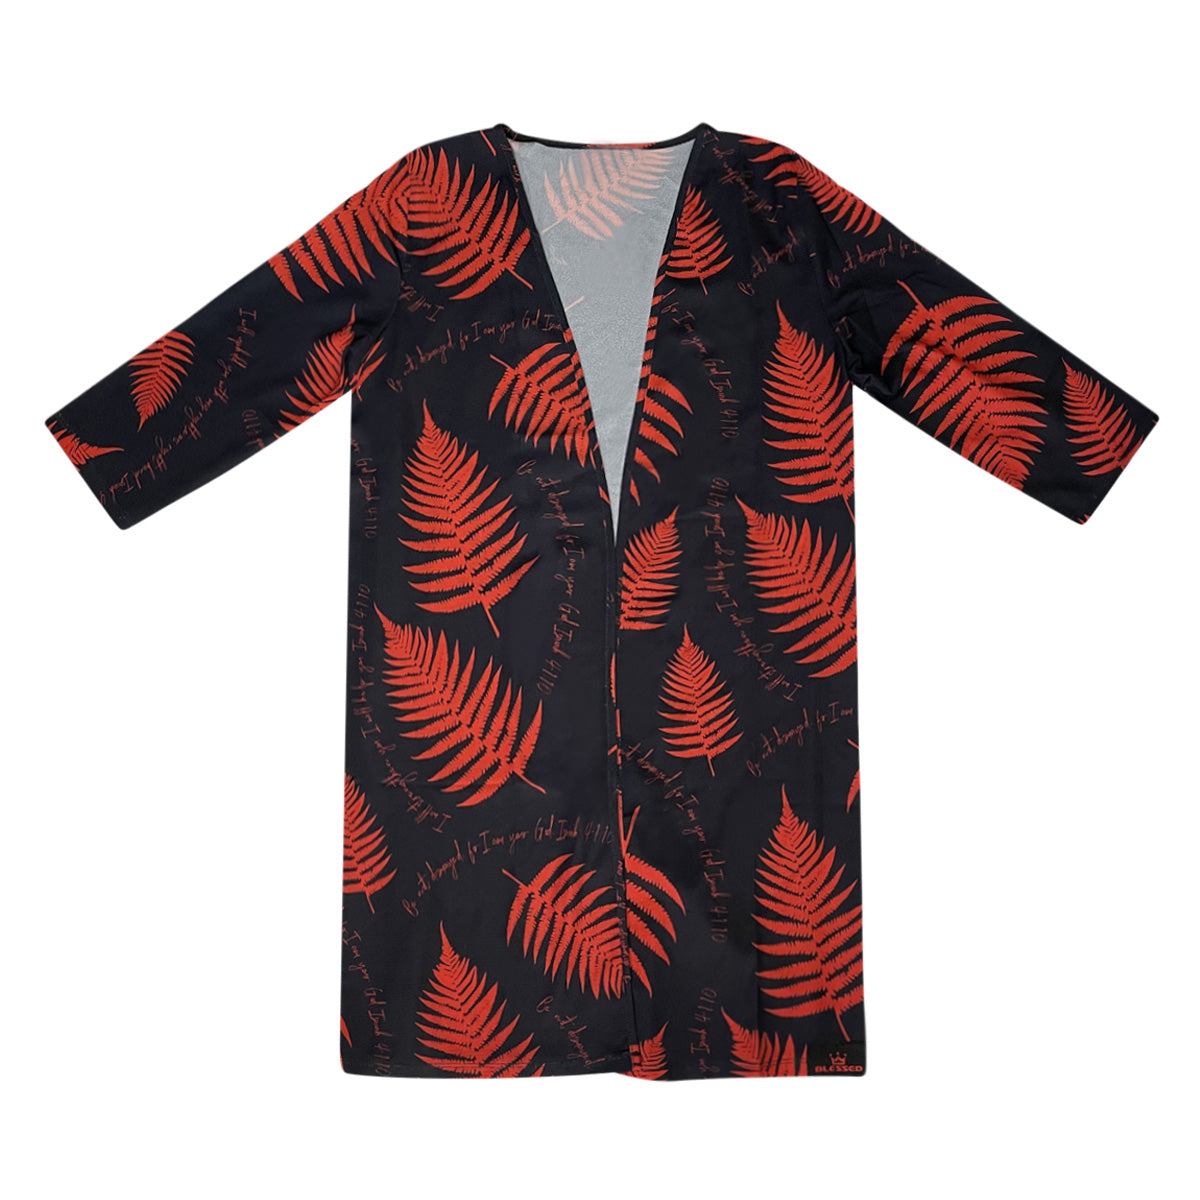 Blessed "Fern Collection" Women's Shirt Dress or Kimono